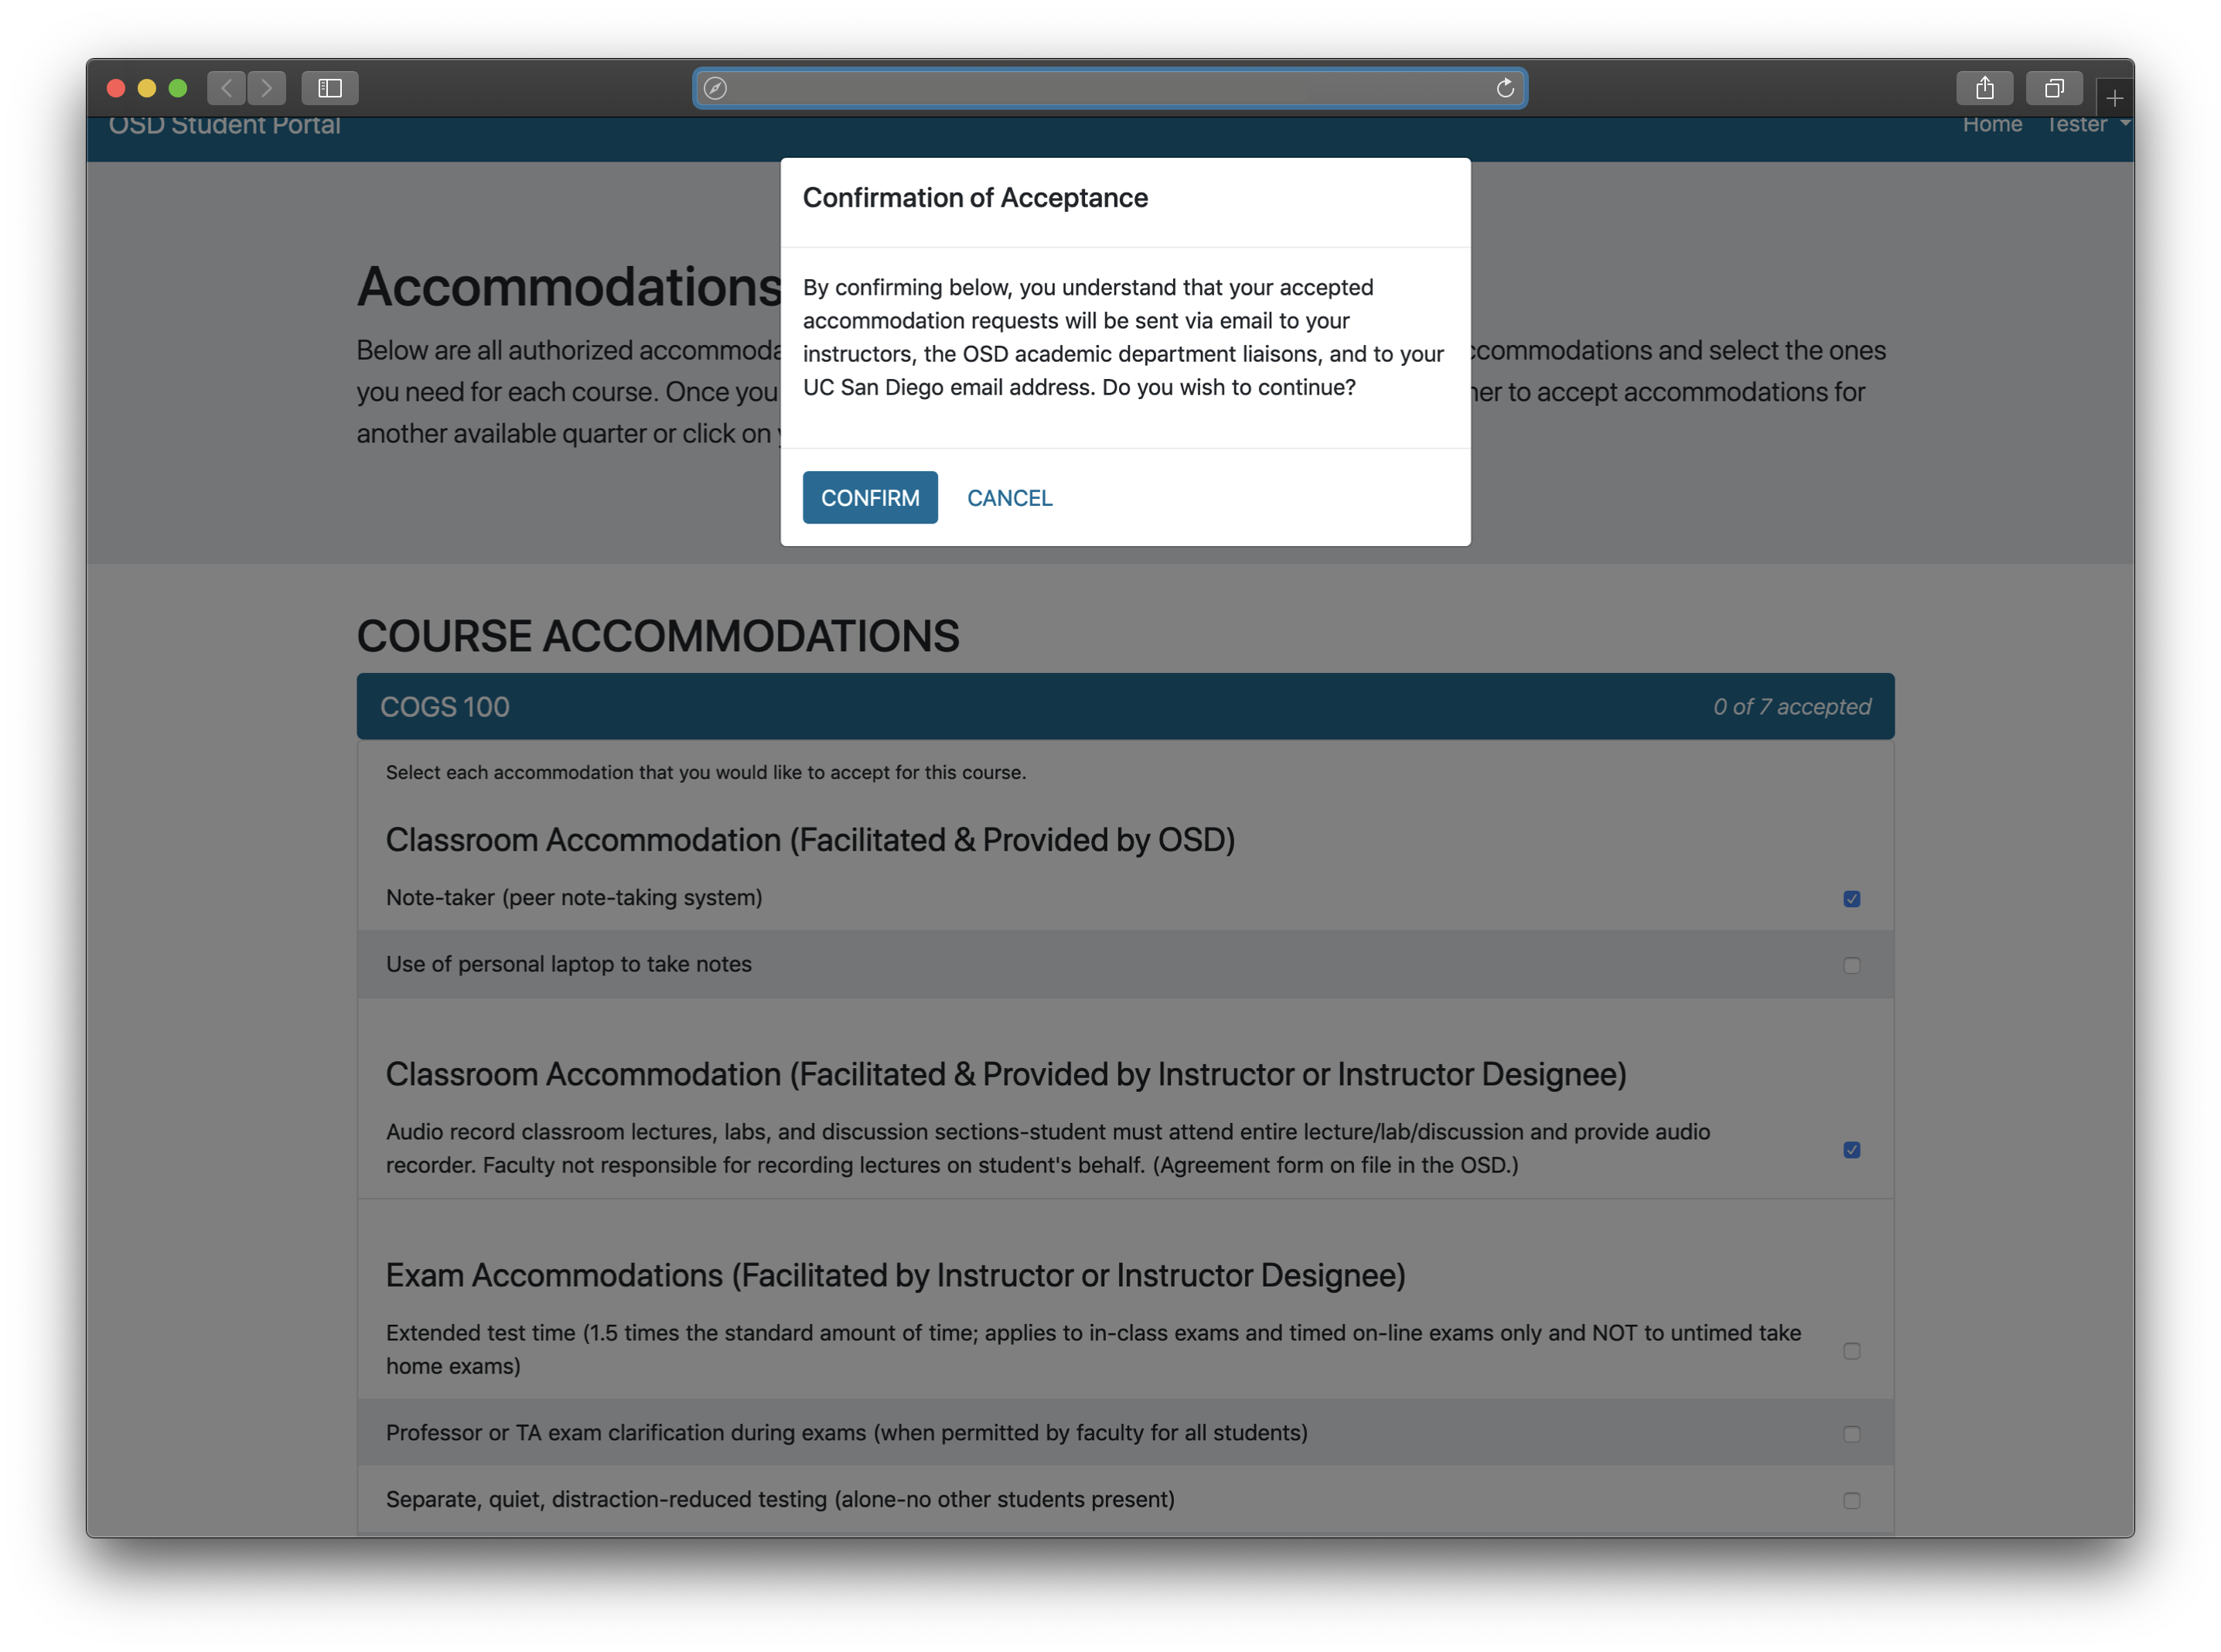 Screenshot of the dialogue box for confirming accommodations after the first day of instruction.